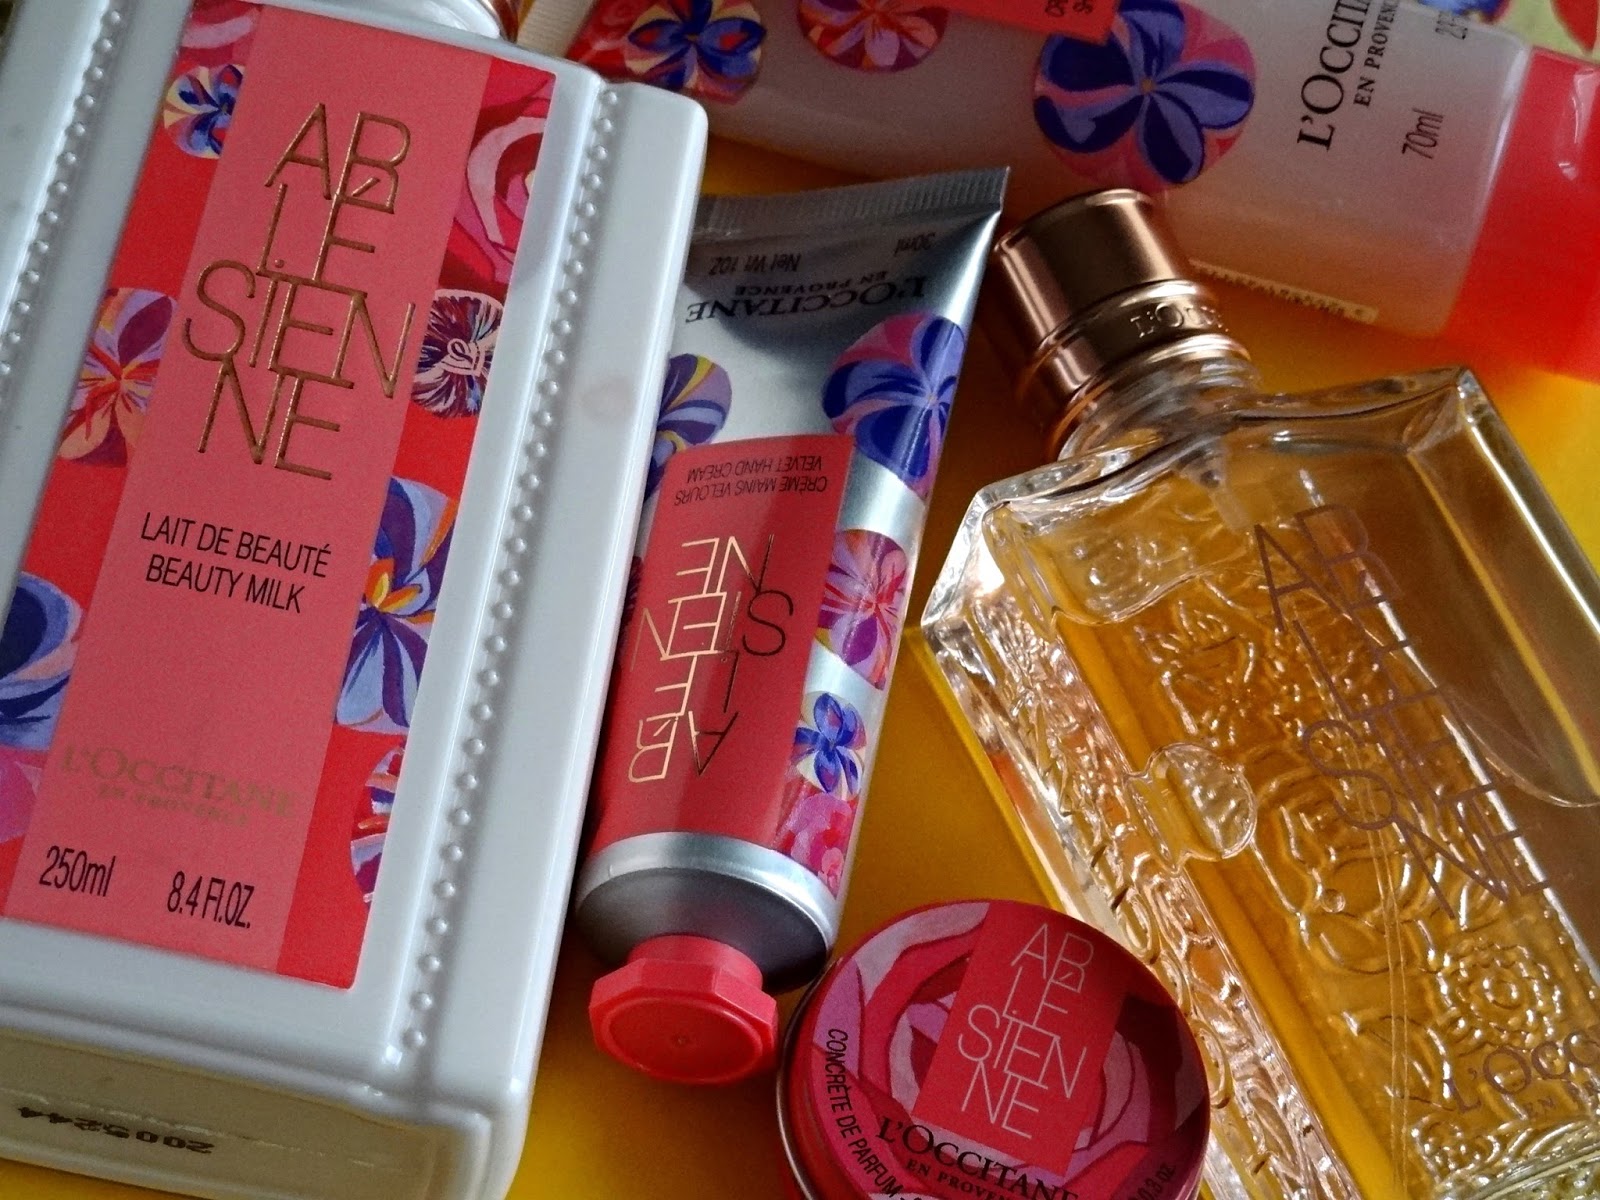 L'occitane Arlesienne Holiday 2014 Collection